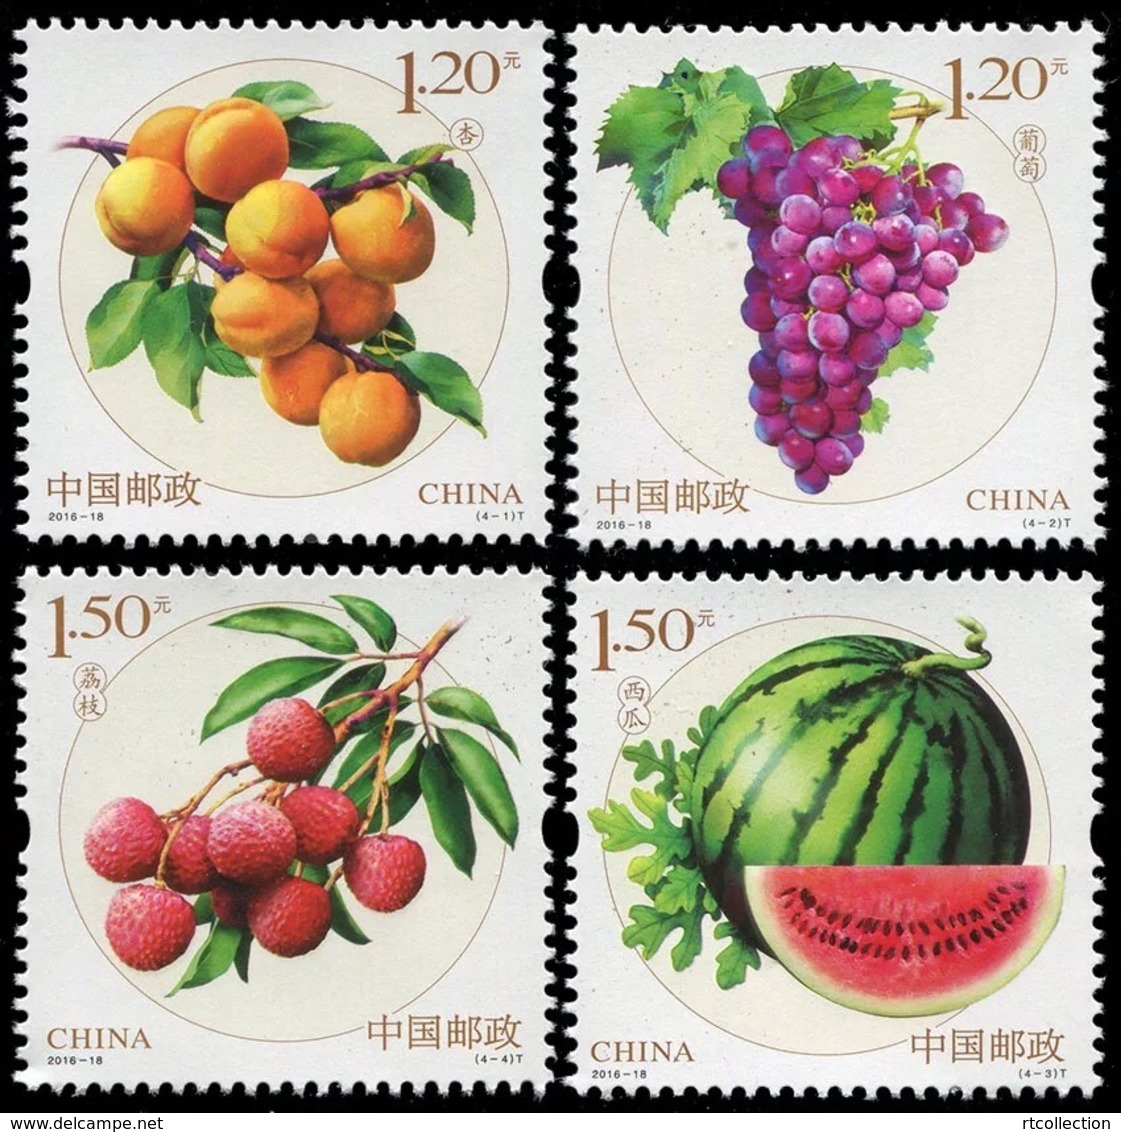 China 2016 2016-18 Special Stamps Fruits II Grapes Apricots Water Melon Lychees Series No. 2 Plants Food Nature V4 MNH - Alimentazione